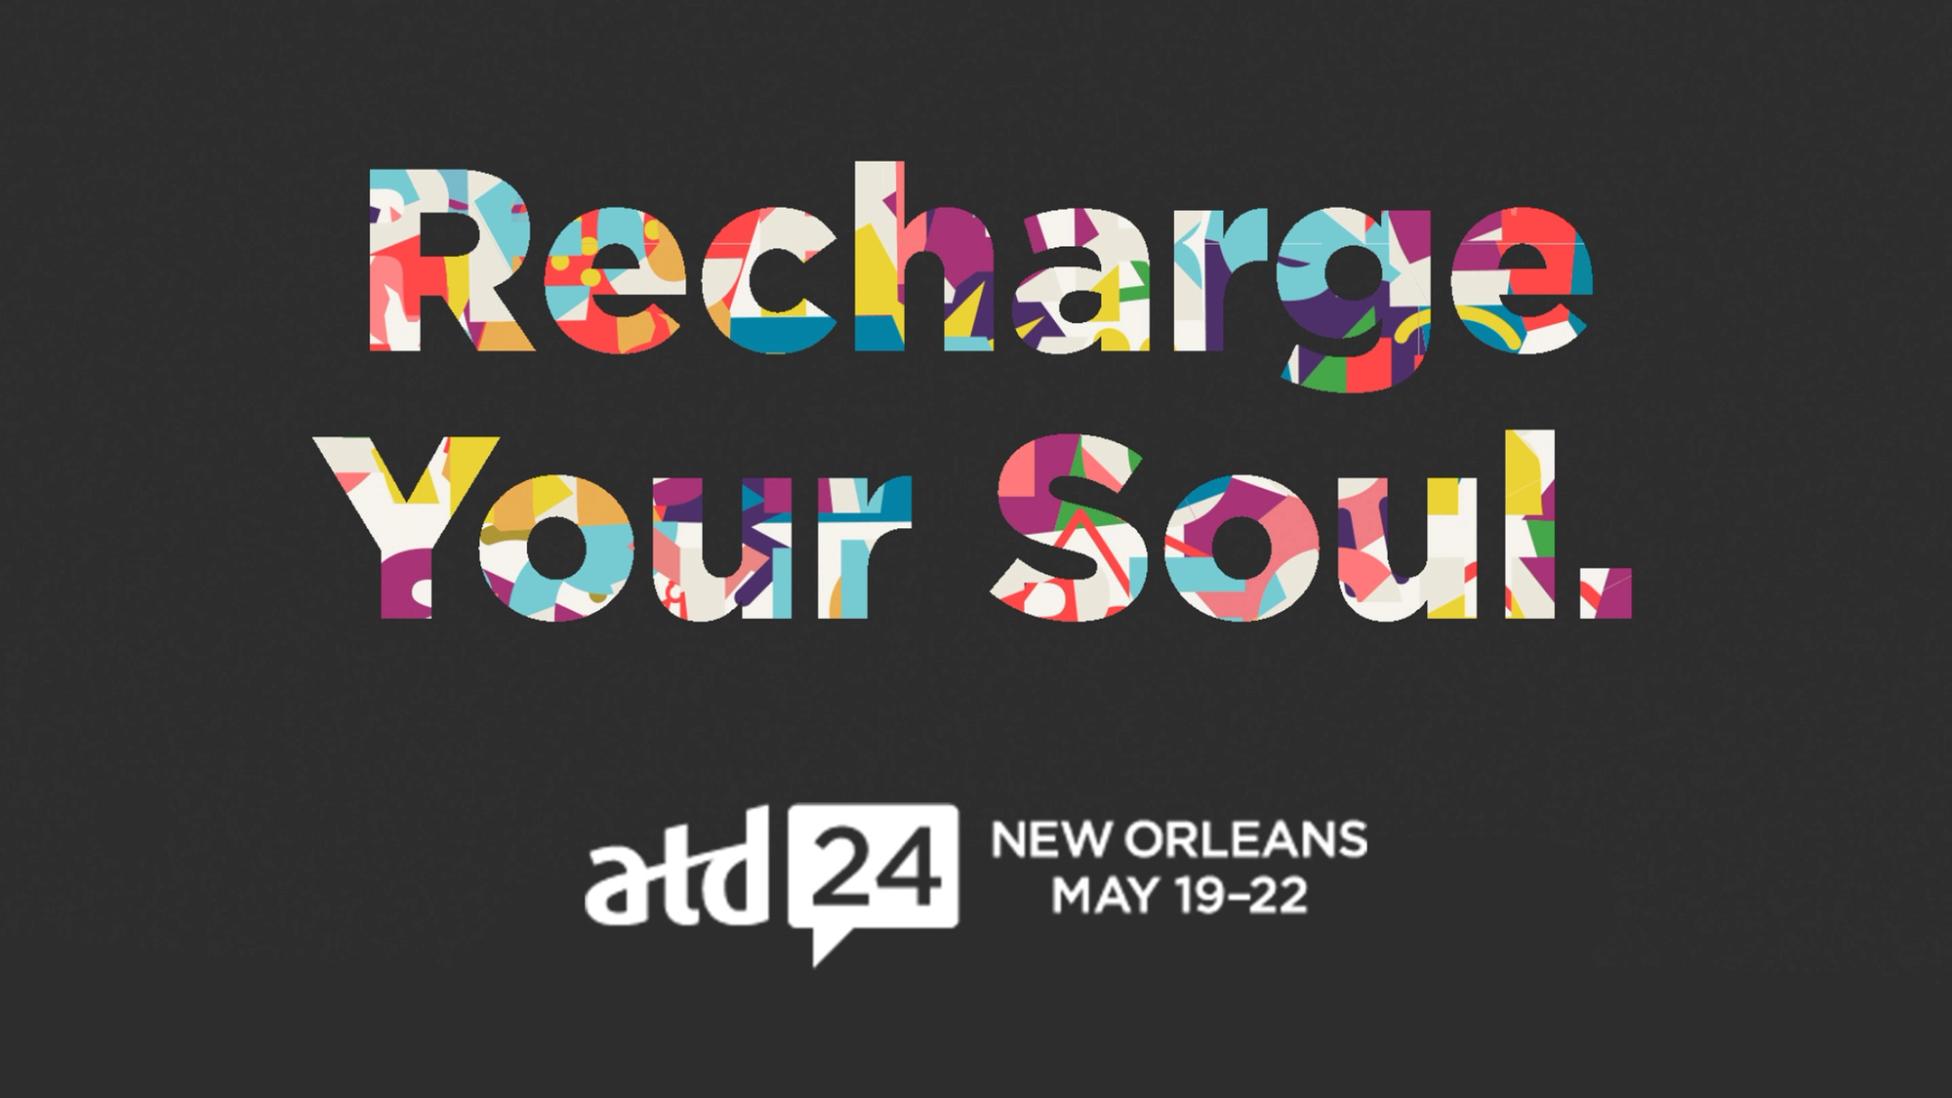 ATD International Conference & Exposition, ATD24